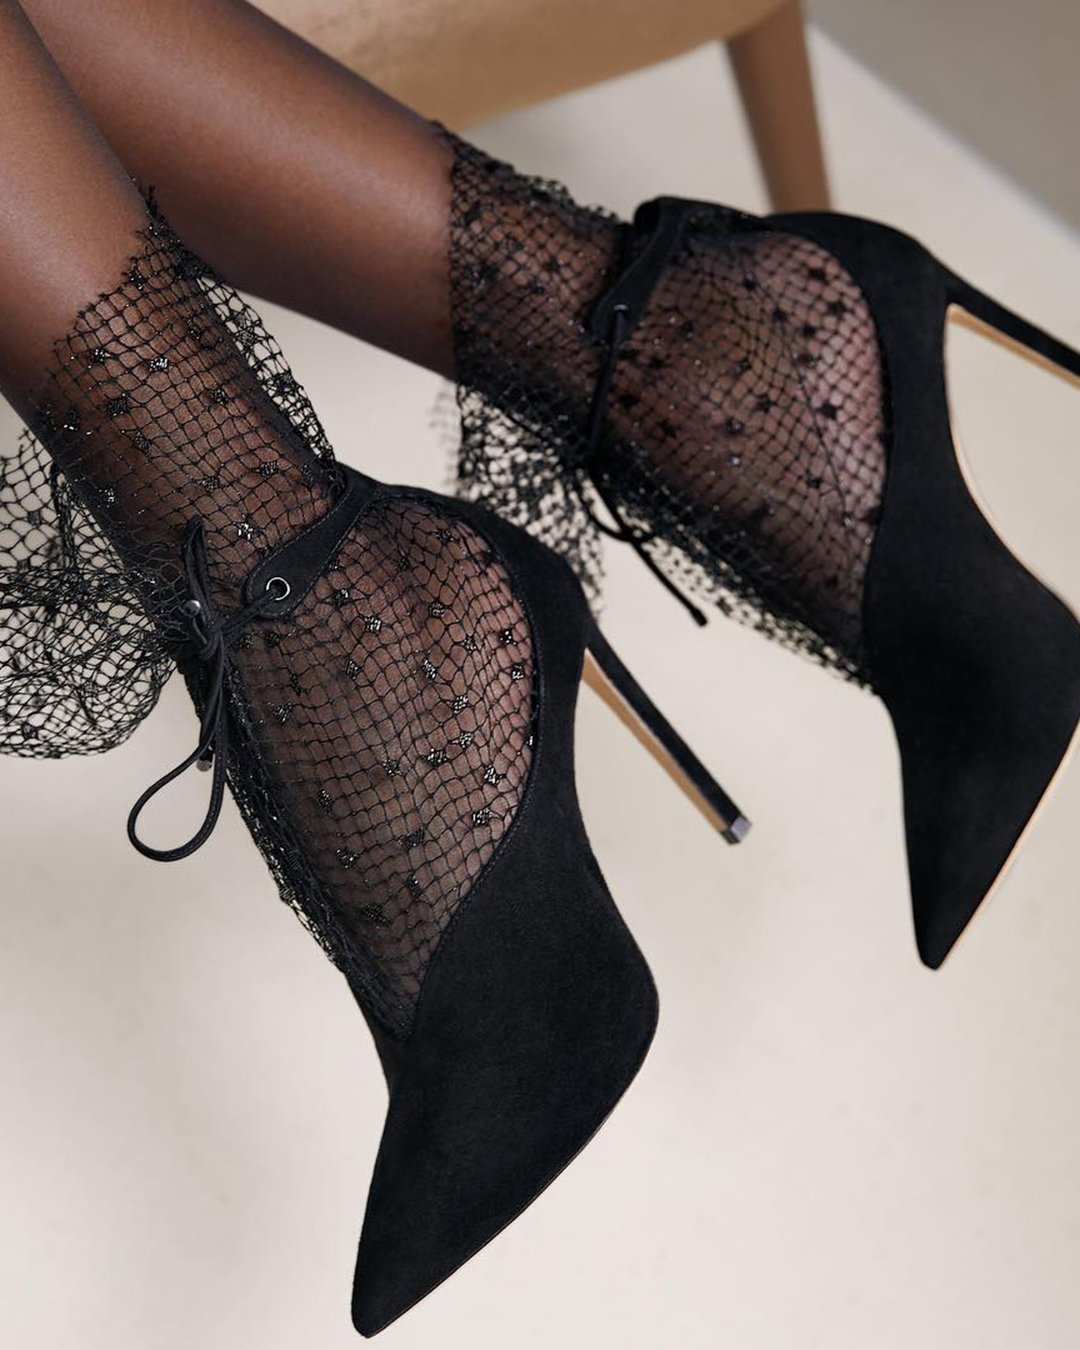 black shoes for wedding heels with veil gothic jimmychoo